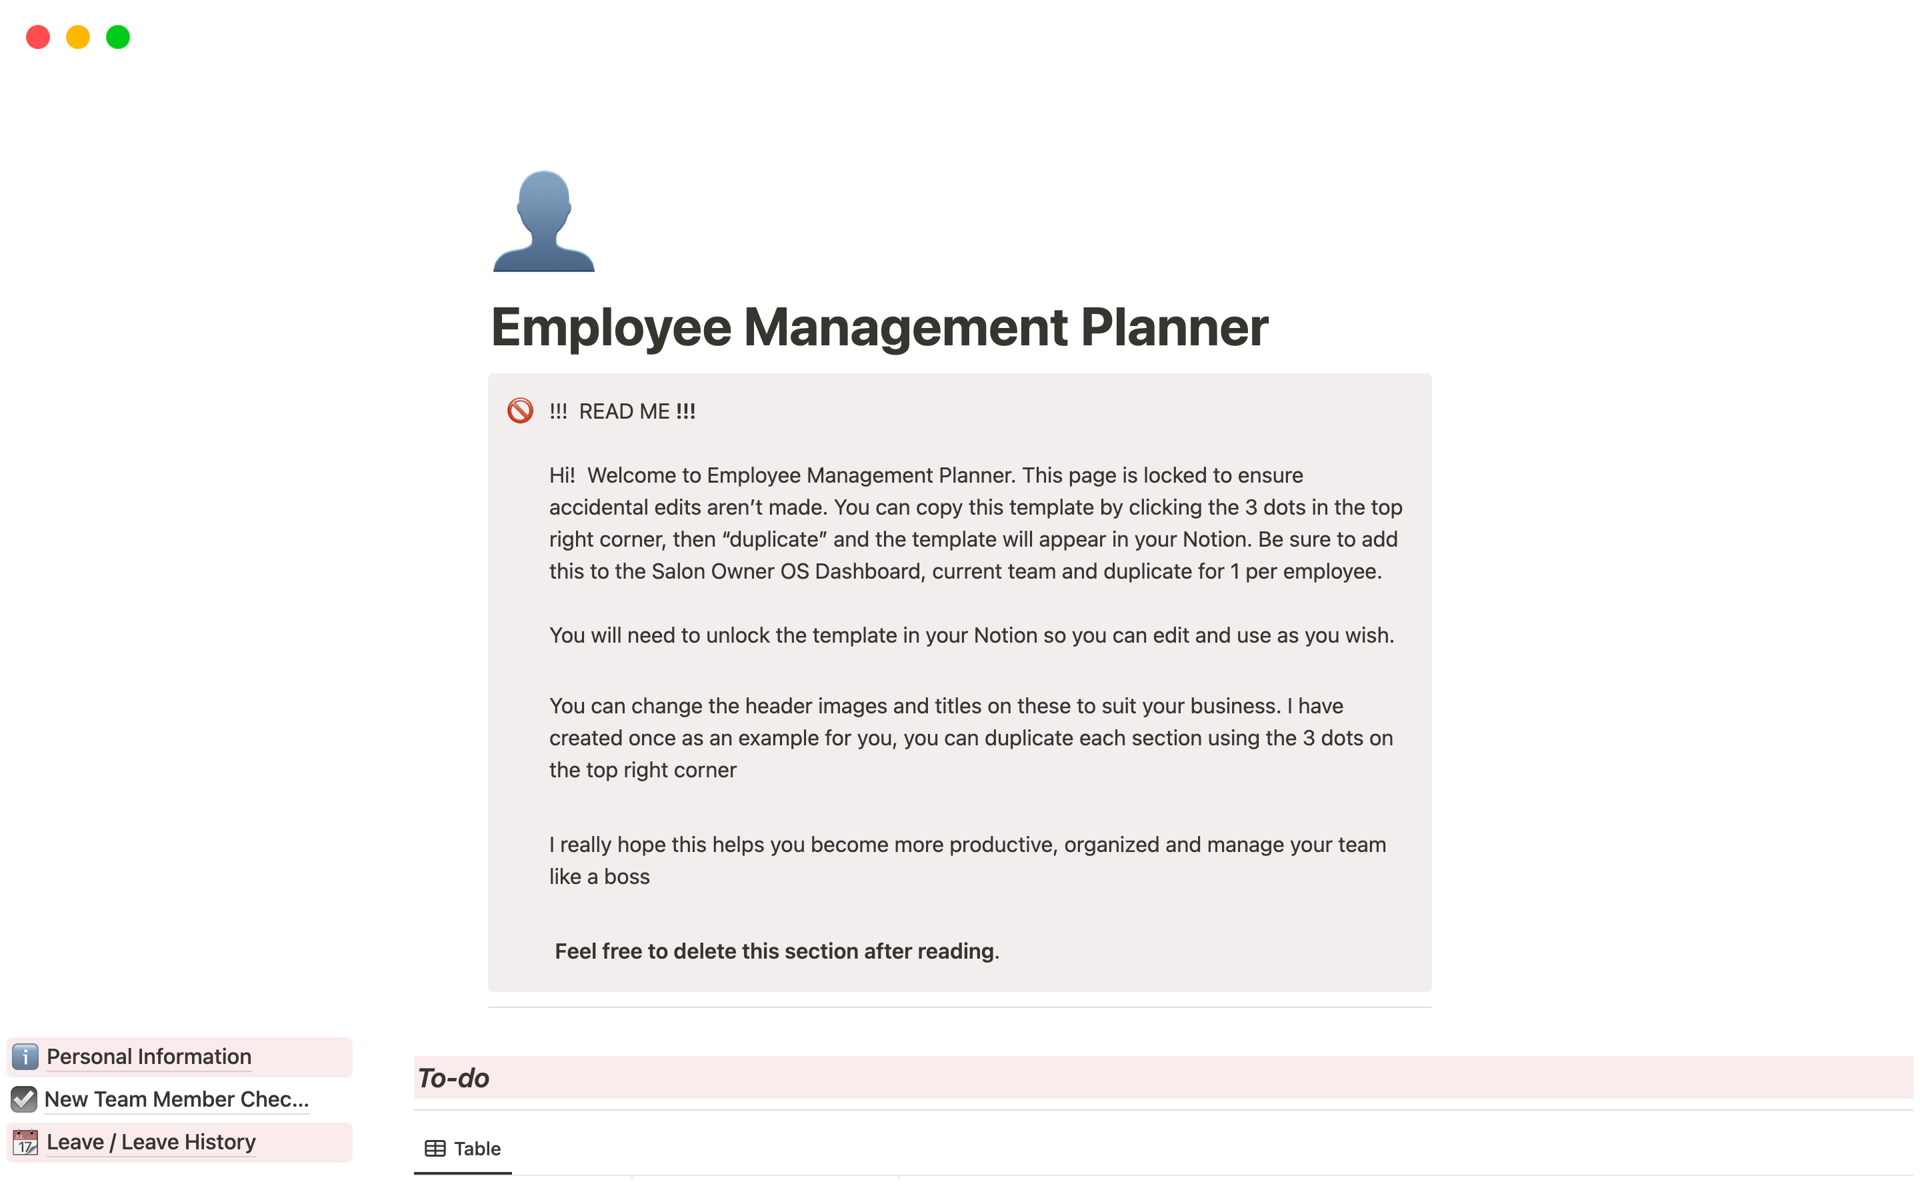 The Employee Management Planner is a template that covers various aspects of employee management such as 1:1 meeting note tracker, individual goal tracker, weekly employee review and much more.